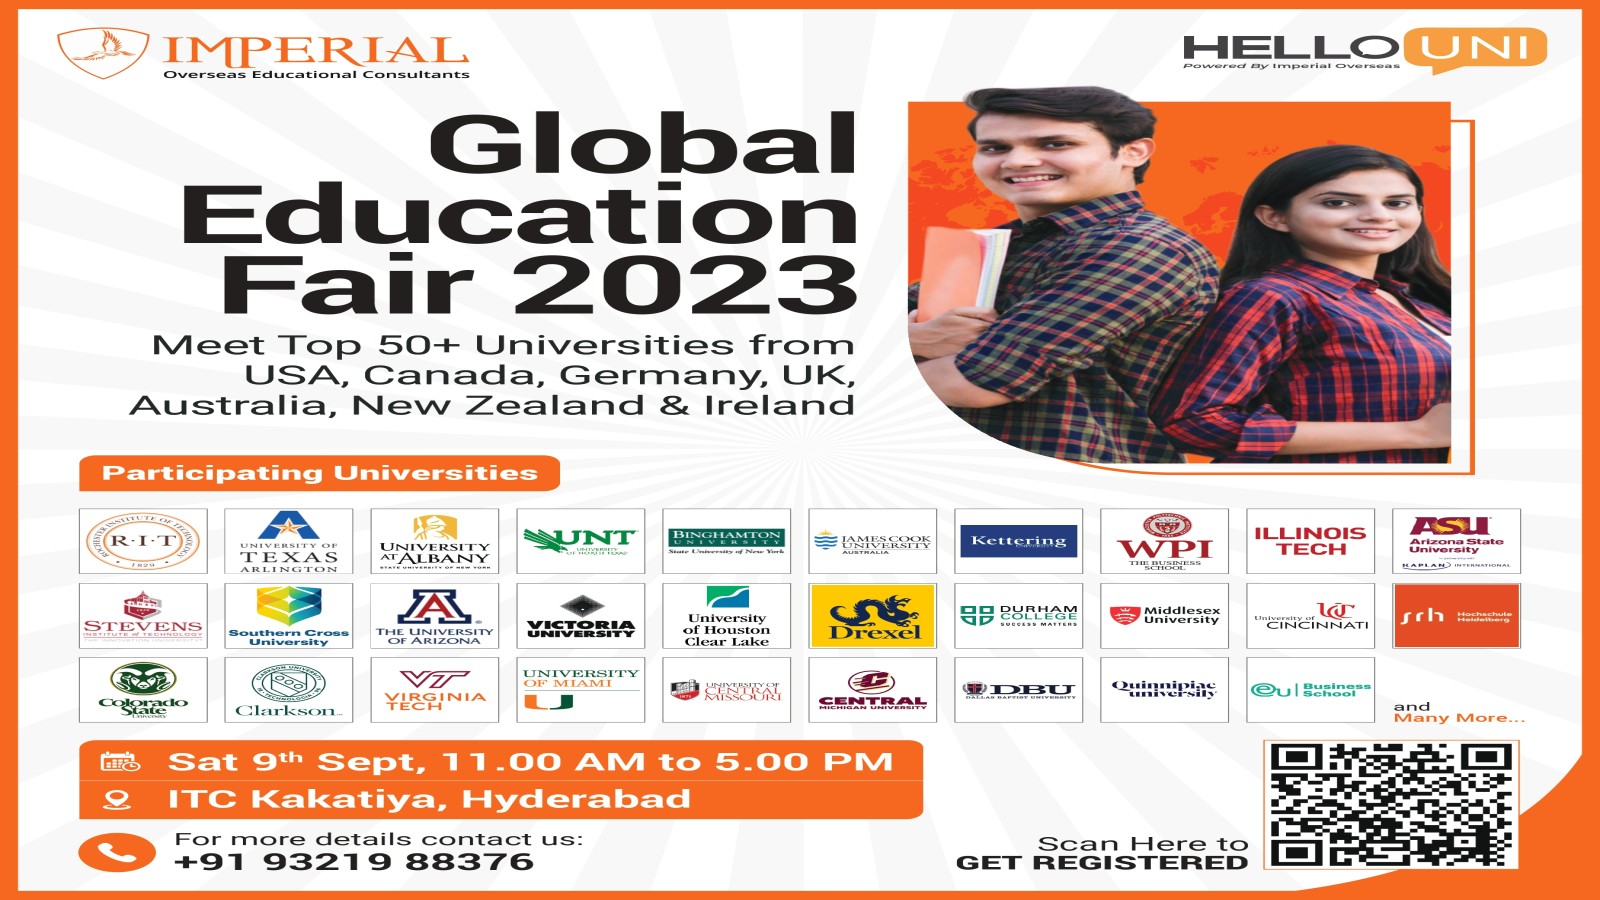 Global Education Fair 2023 Hyderabad by HelloUni with Imperial Overseas Educational Consultants, Hyderabad, Telangana, India